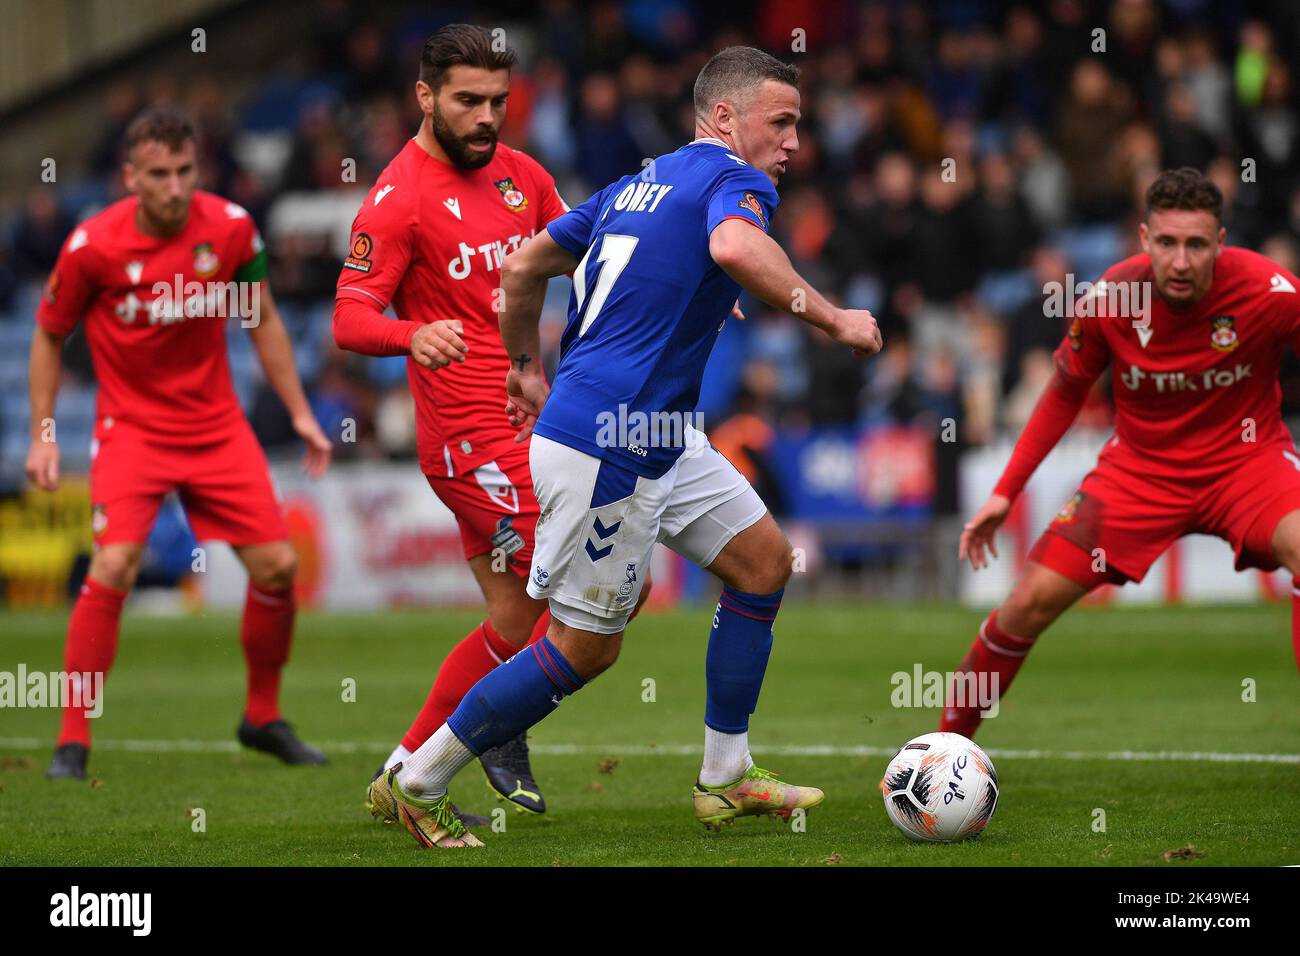 Oldham, UK. 1st October 2022during the Vanarama National League match between Oldham Athletic and Wrexham at Boundary Park, Oldham on Saturday 1st October 2022John Rooney of Oldham Athletic makes his debut during the Vanarama National League match between Oldham Athletic and Wrexham at Boundary Park, Oldham on Saturday 1st October 2022. Credit: MI News & Sport /Alamy Live News Stock Photo